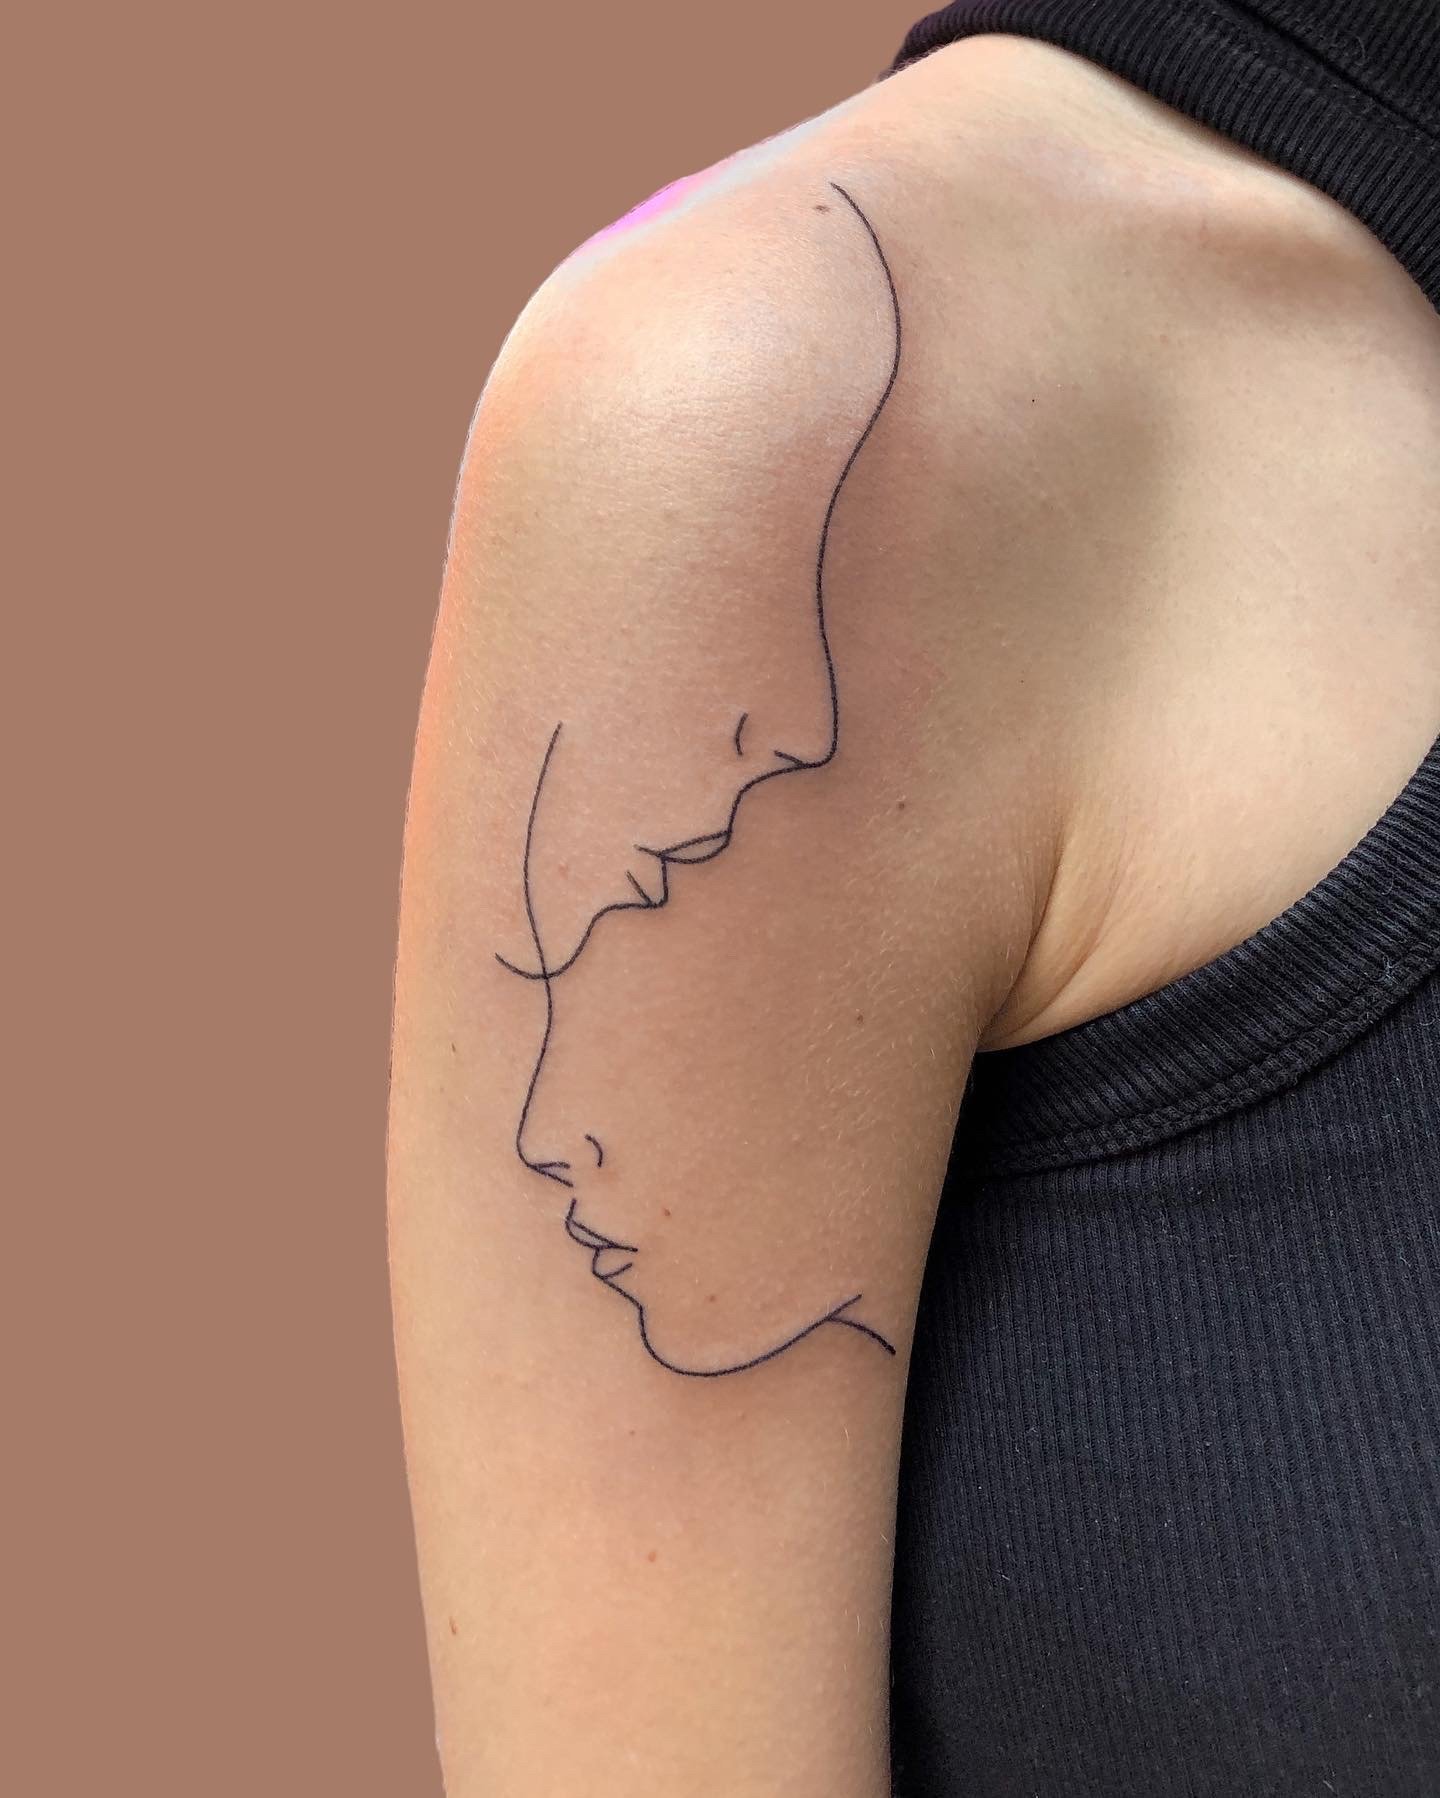 Faces tattoo by lazyfactory.JPG